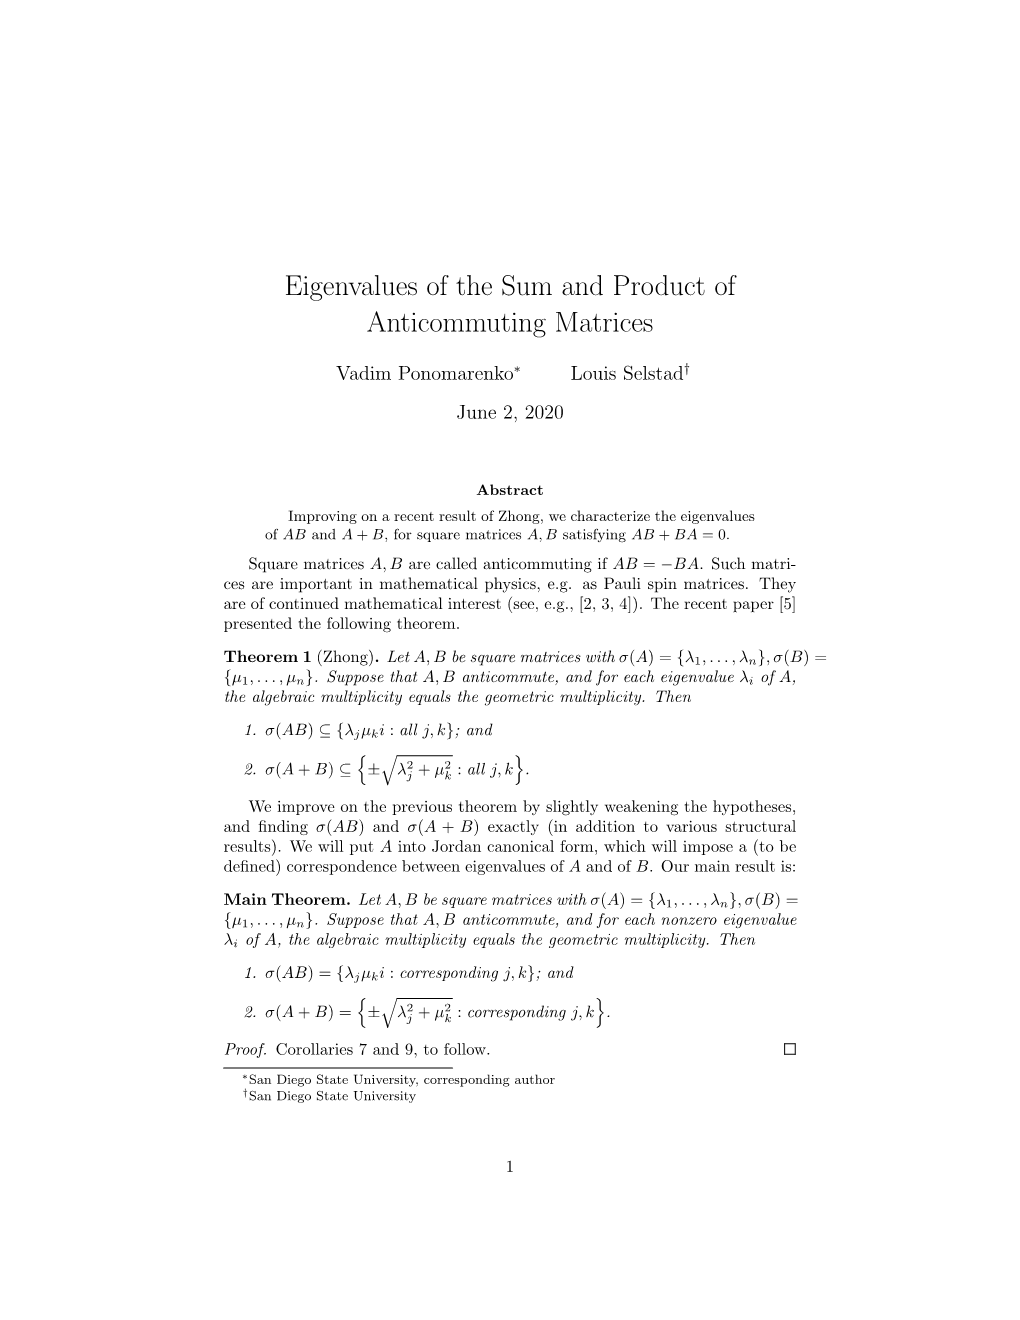 Eigenvalues of the Sum and Product of Anticommuting Matrices